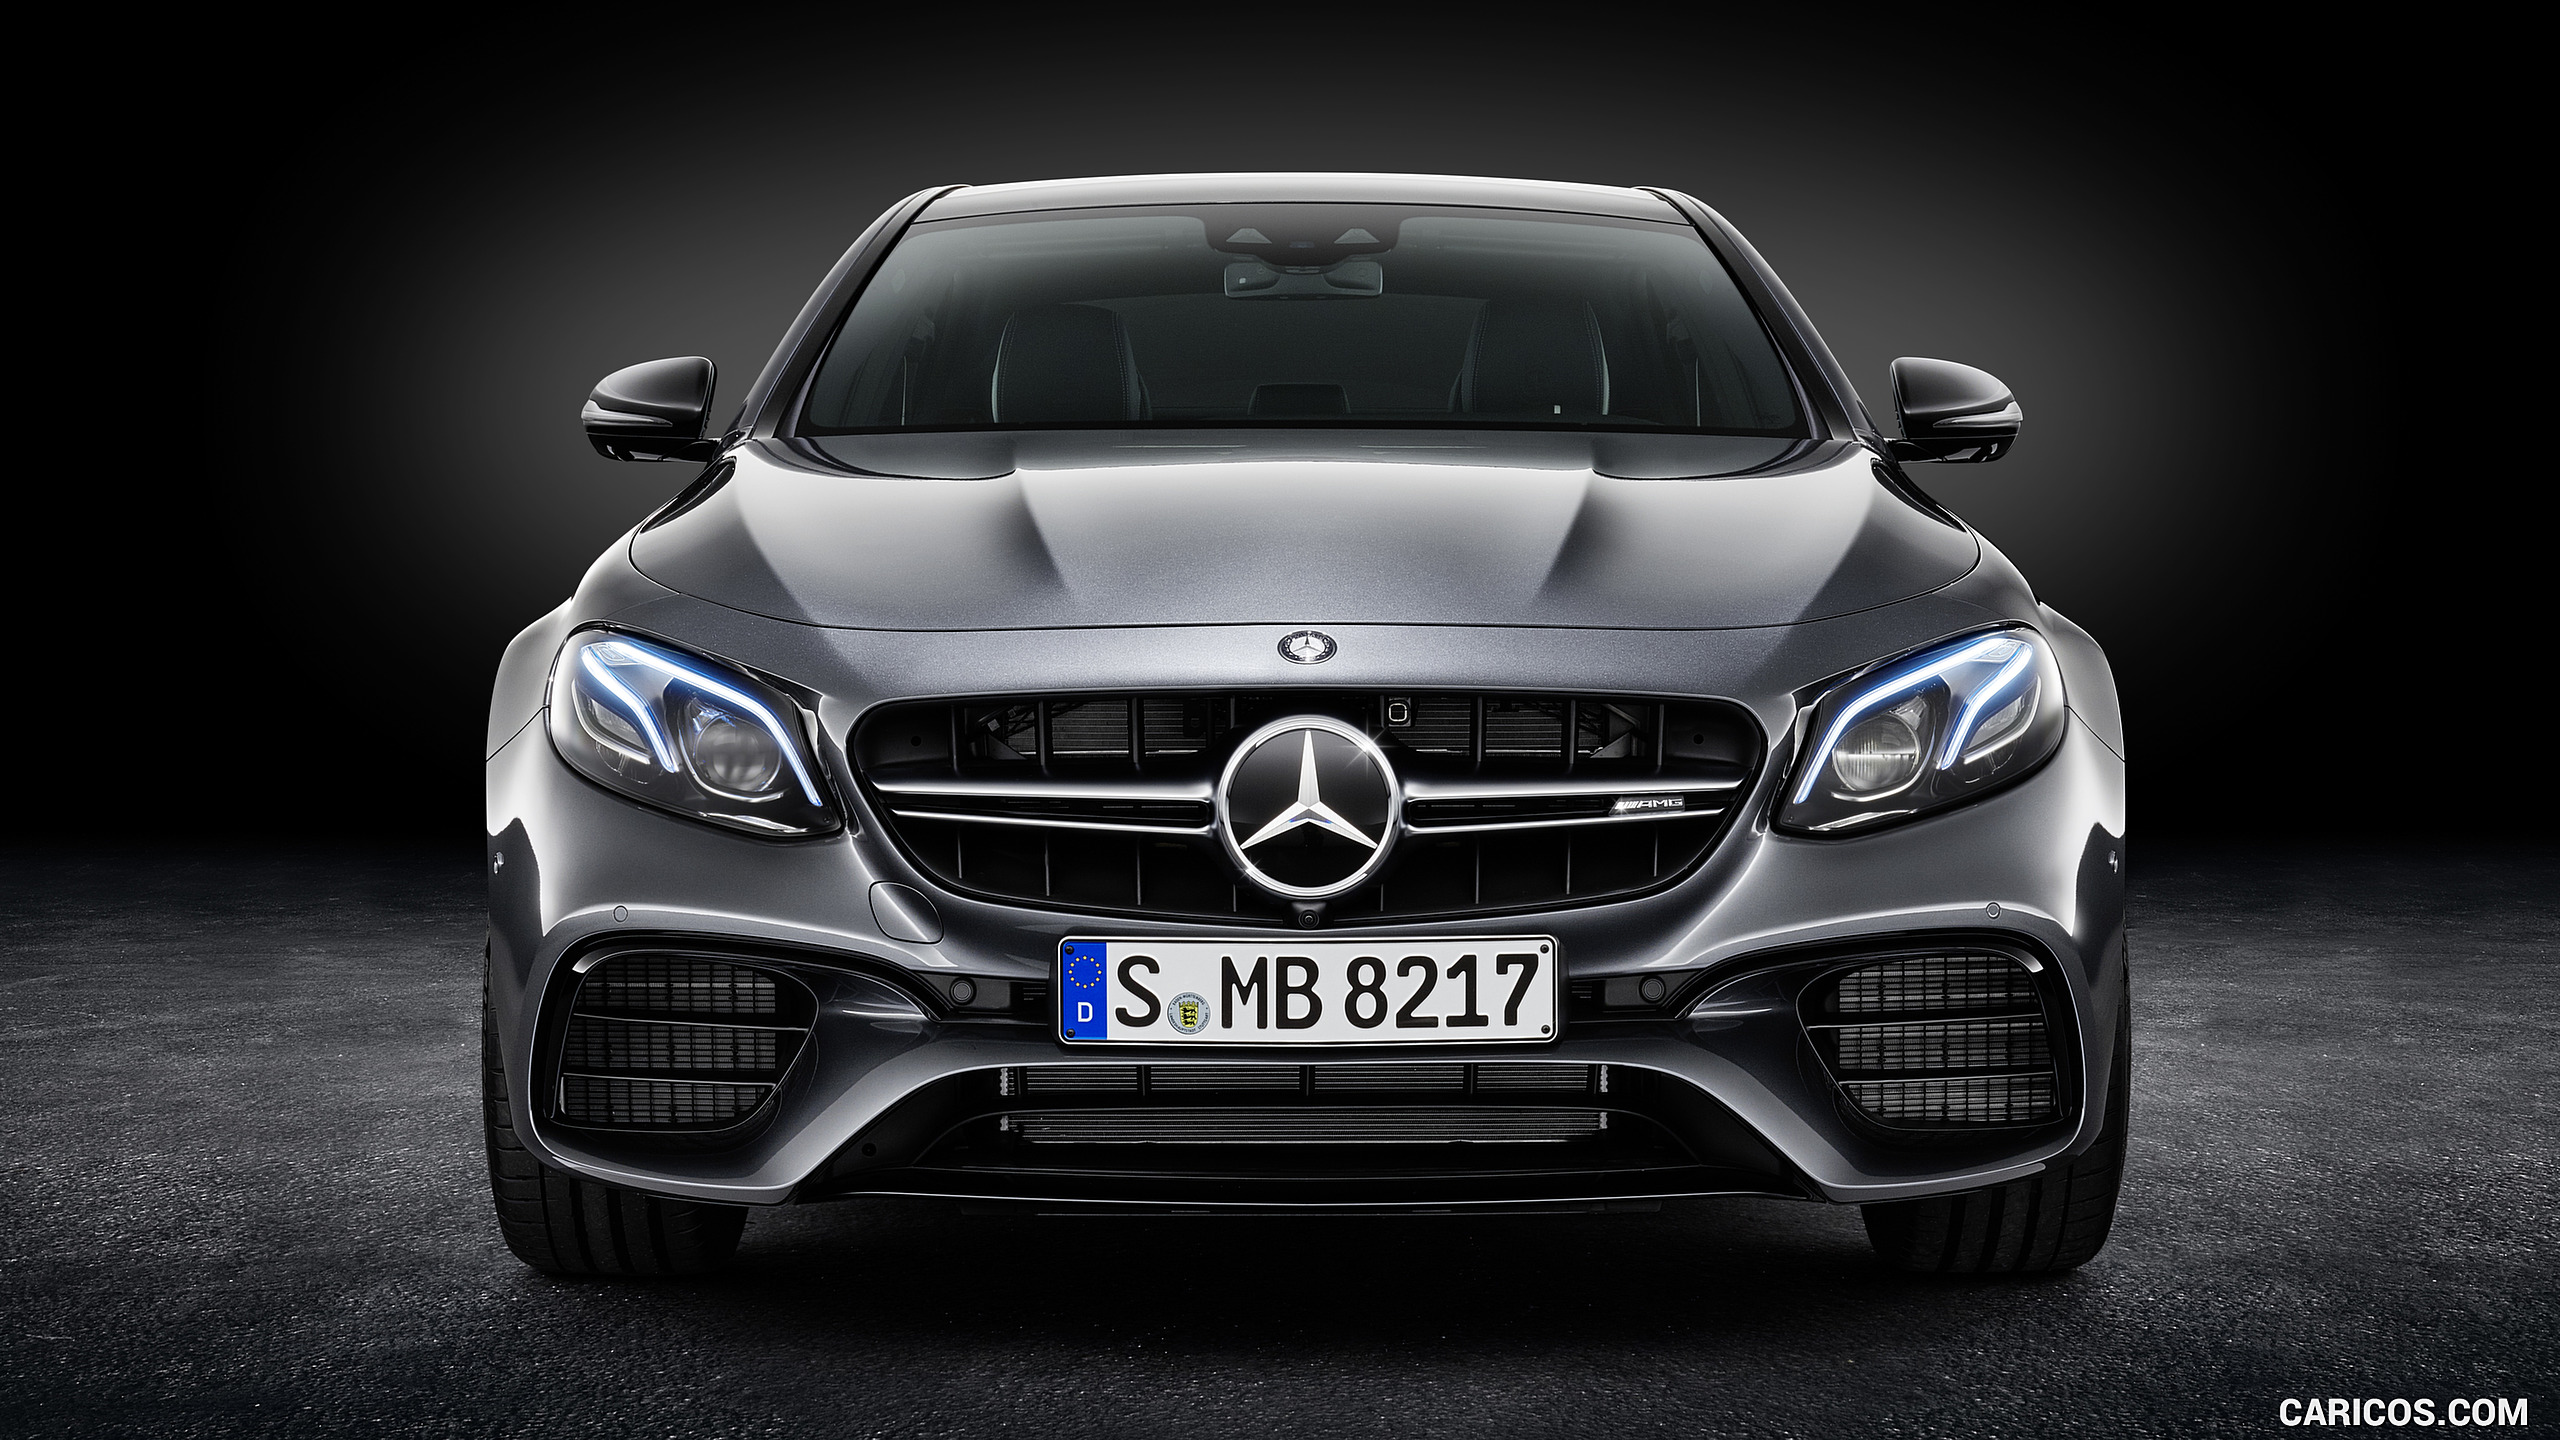 2018 Mercedes-AMG E63 S 4MATIC+ - Front, #43 of 323